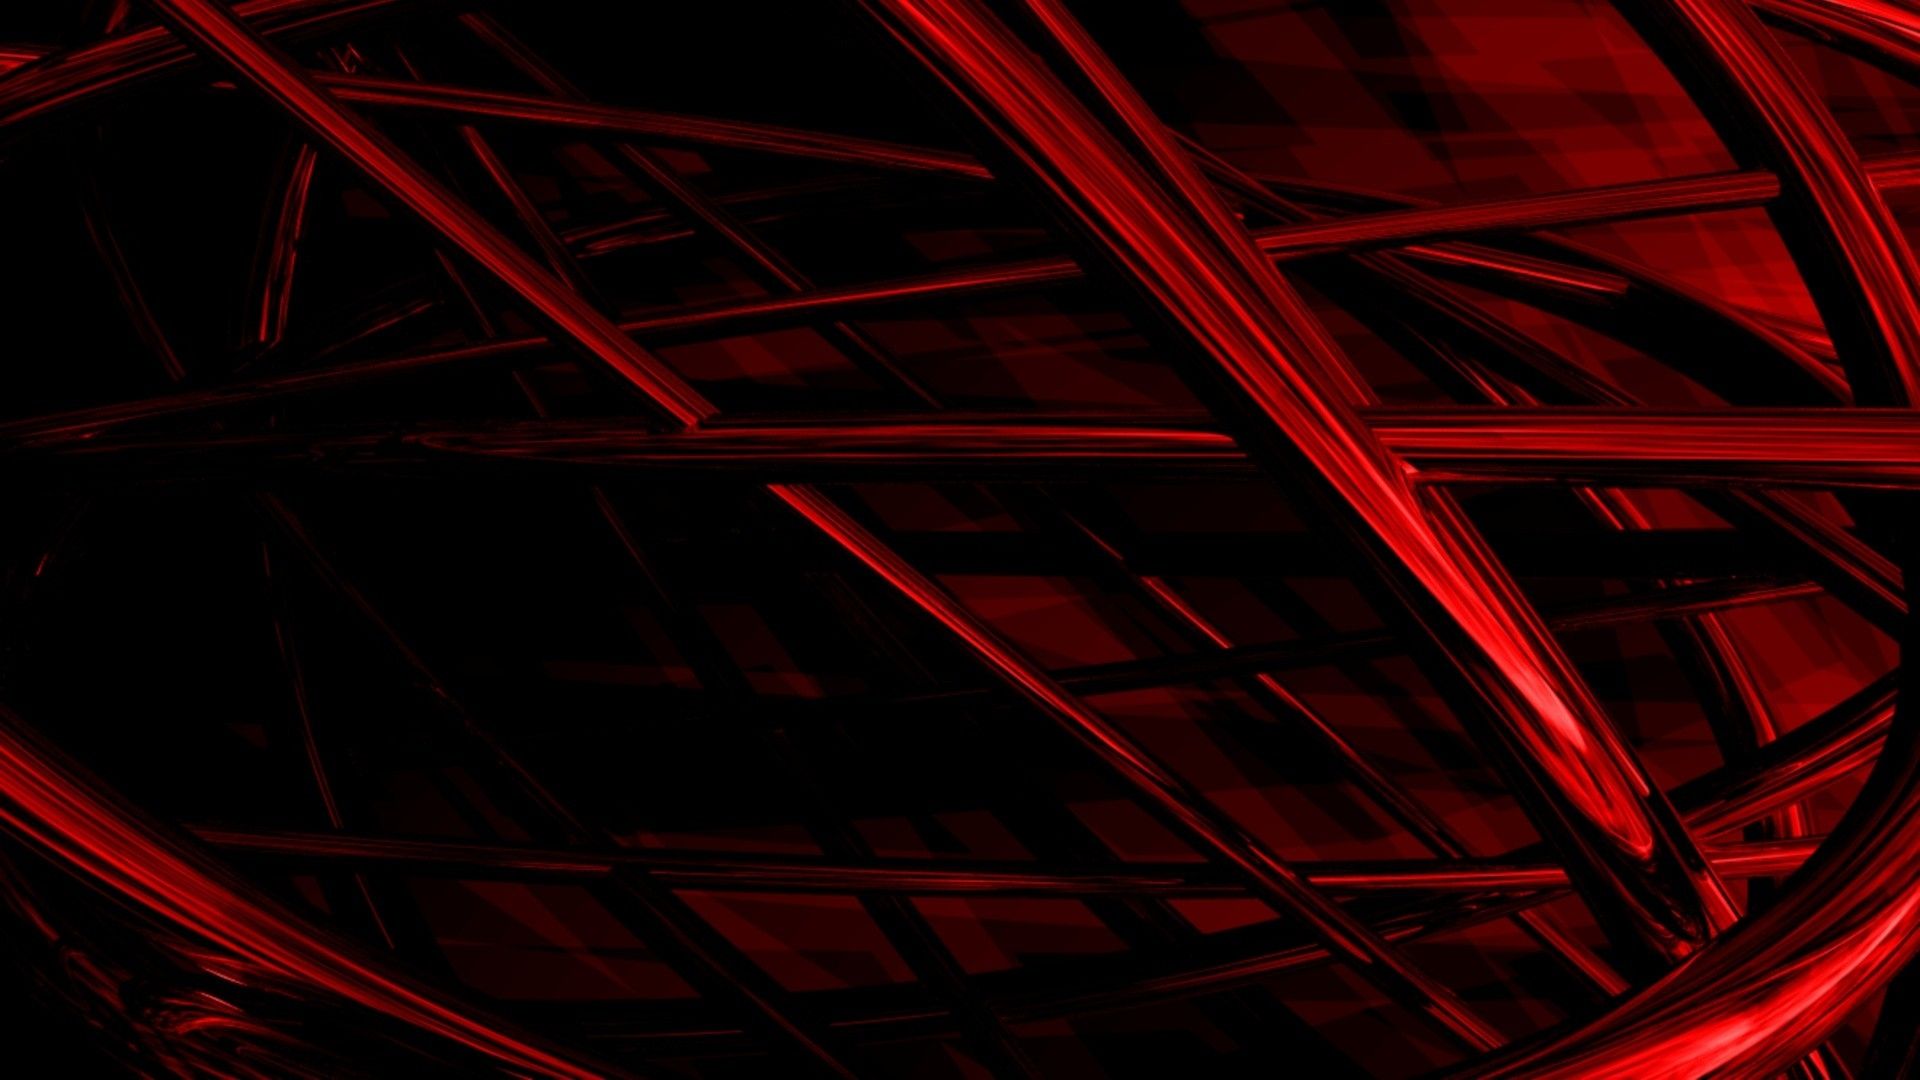 Download Wallpaper 1920x1080 lines, woven, dark, shadow, red Full HD 1080p HD Background